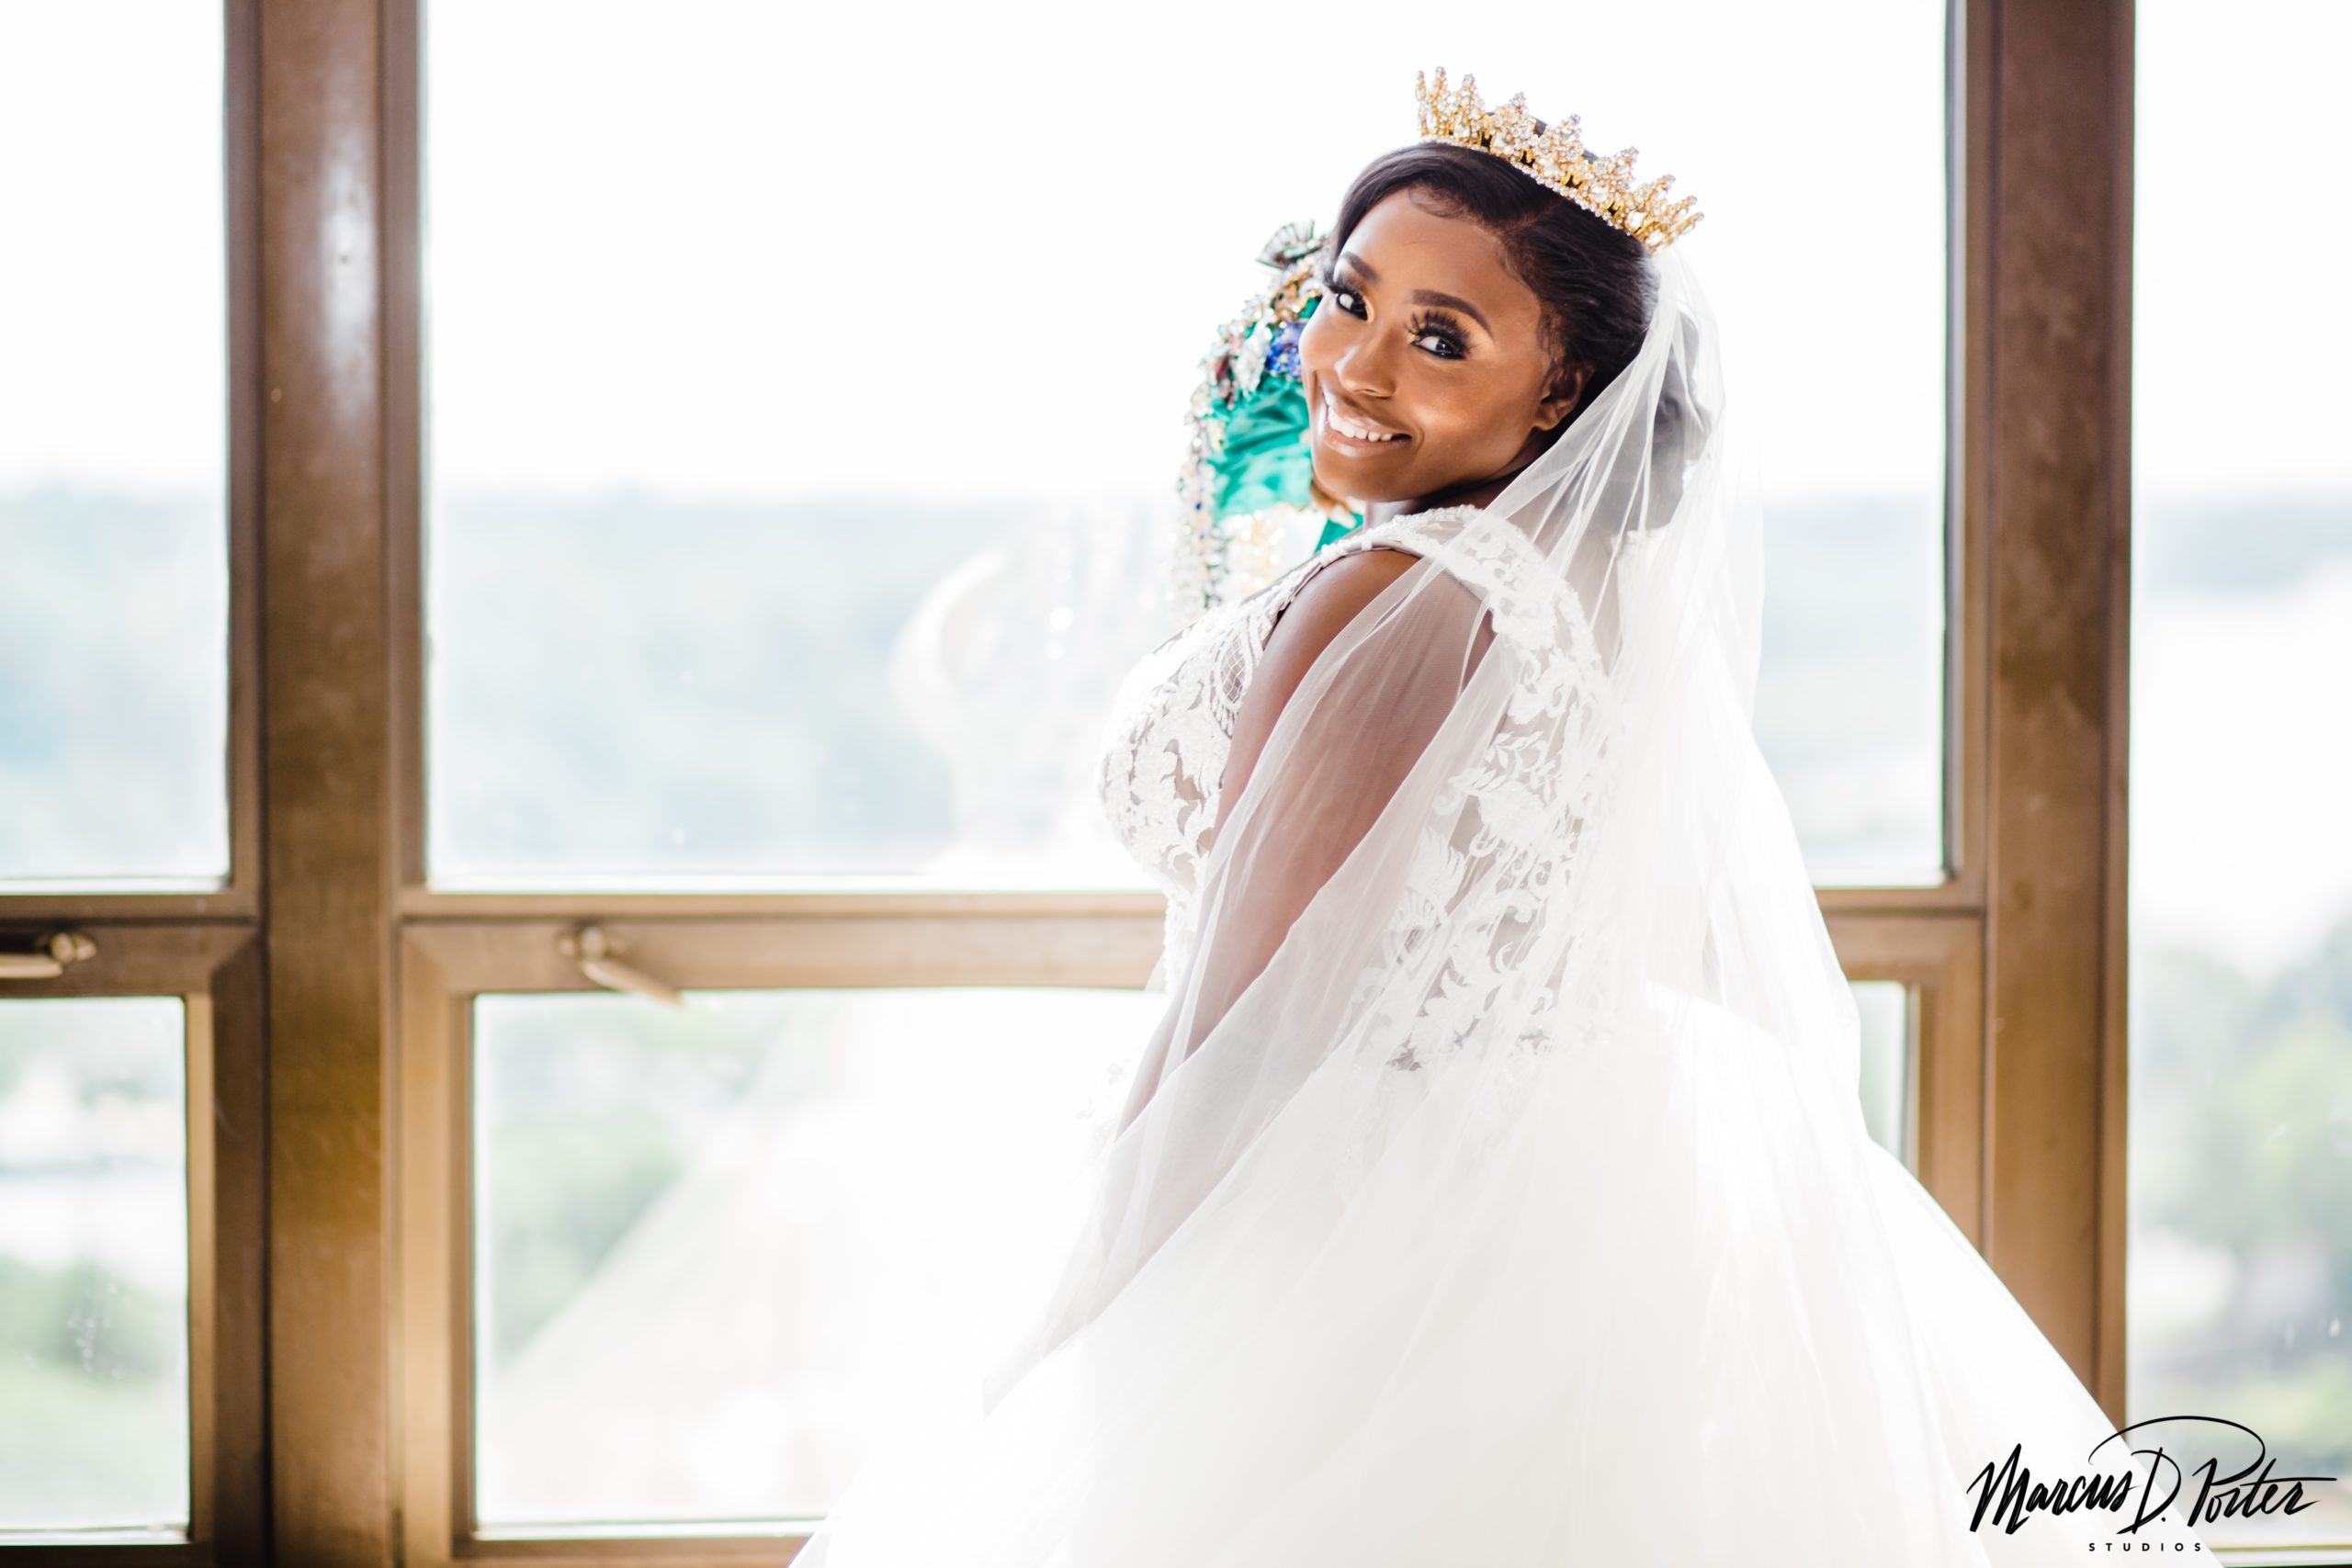 Sharon standing by the window at the Crowne Plaza Hotel in Camden, NJ for her Bridal Portraits